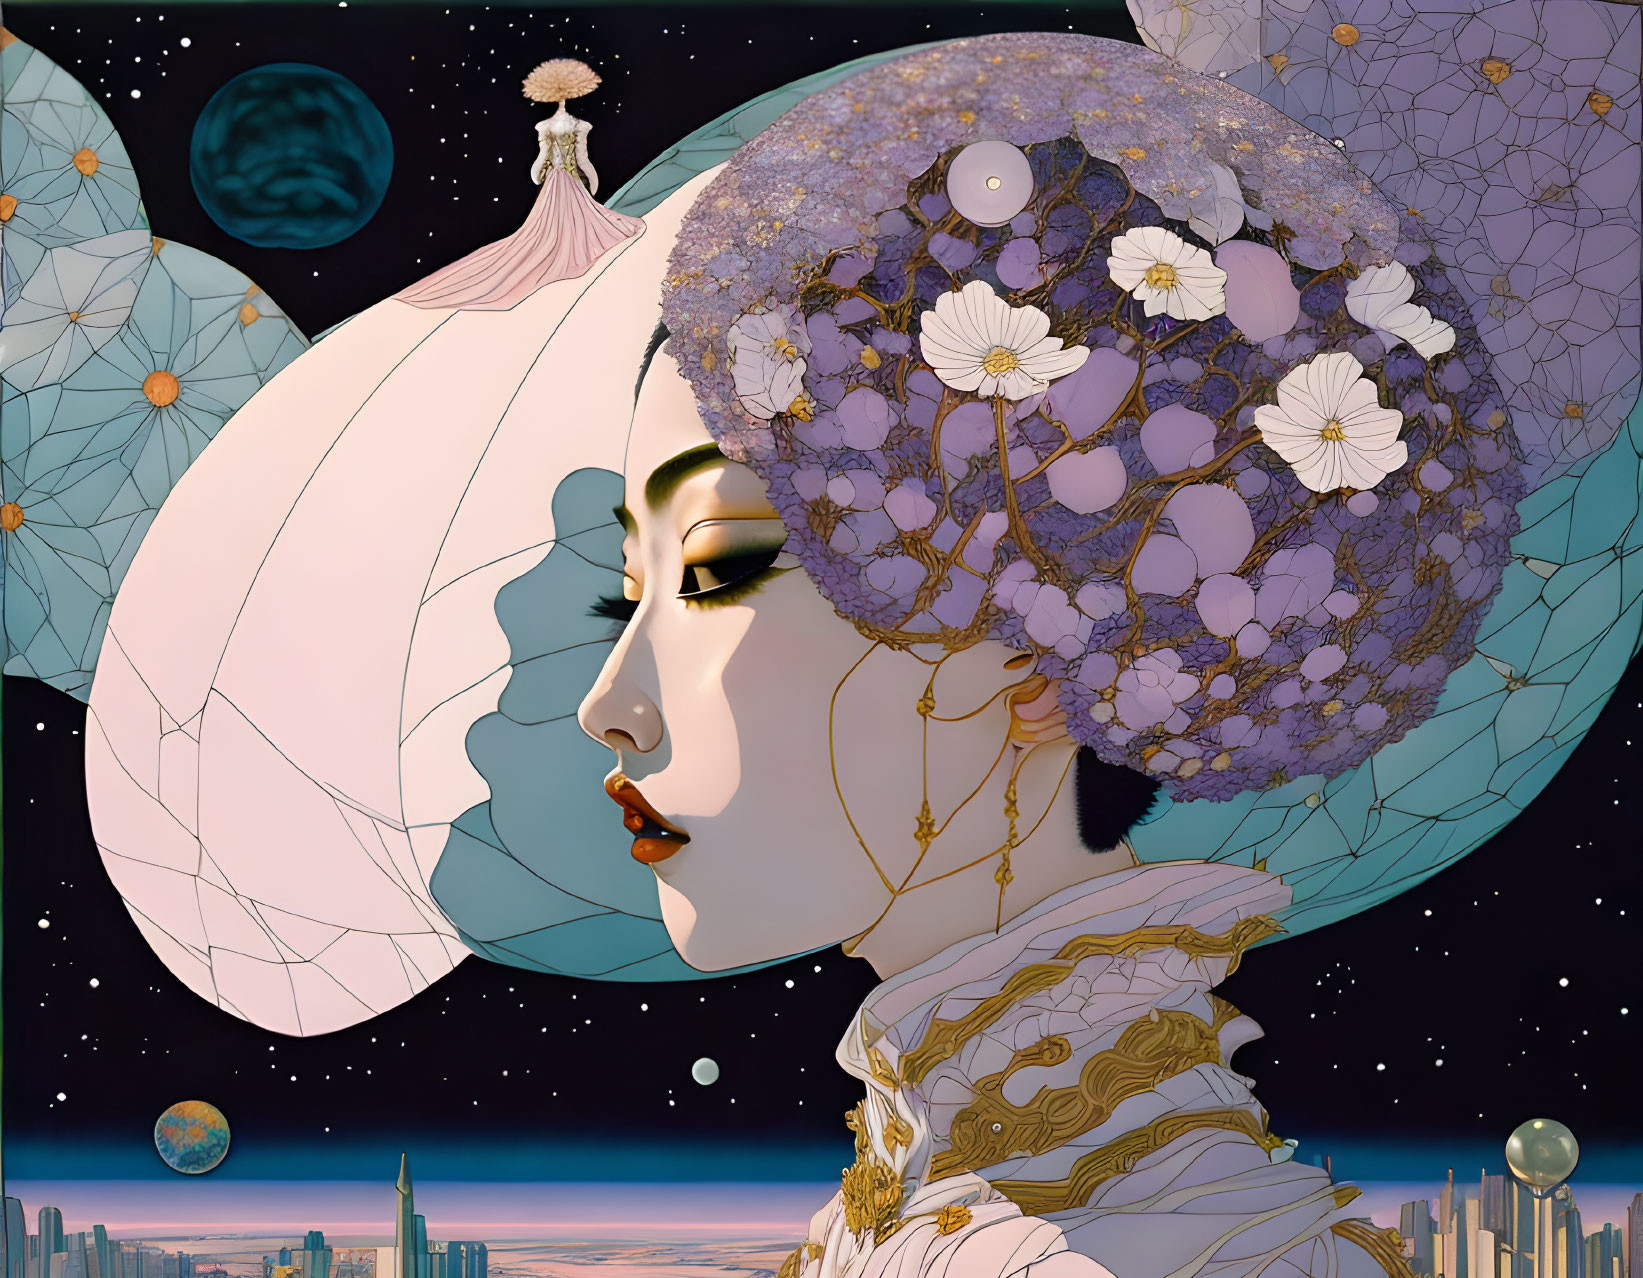 Illustrated portrait of woman with floral headdress in fantasy night sky.